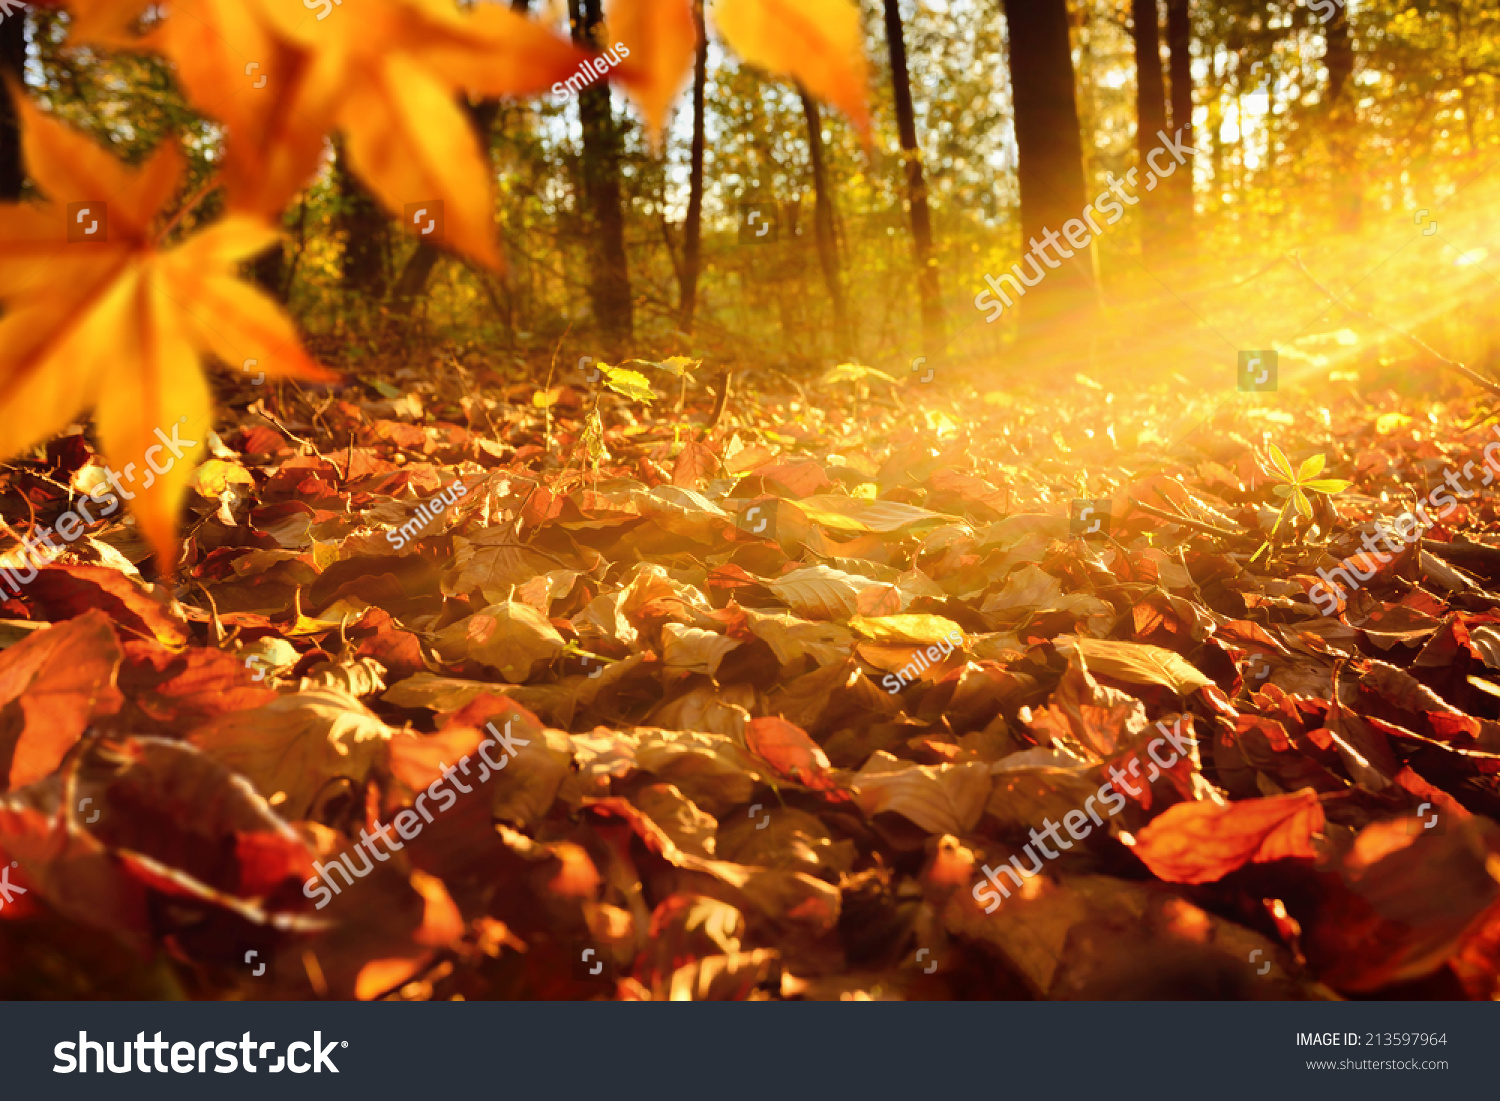 Intense, warm sunrays illuminate the dry, gold beech leaves covering the forest ground #213597964